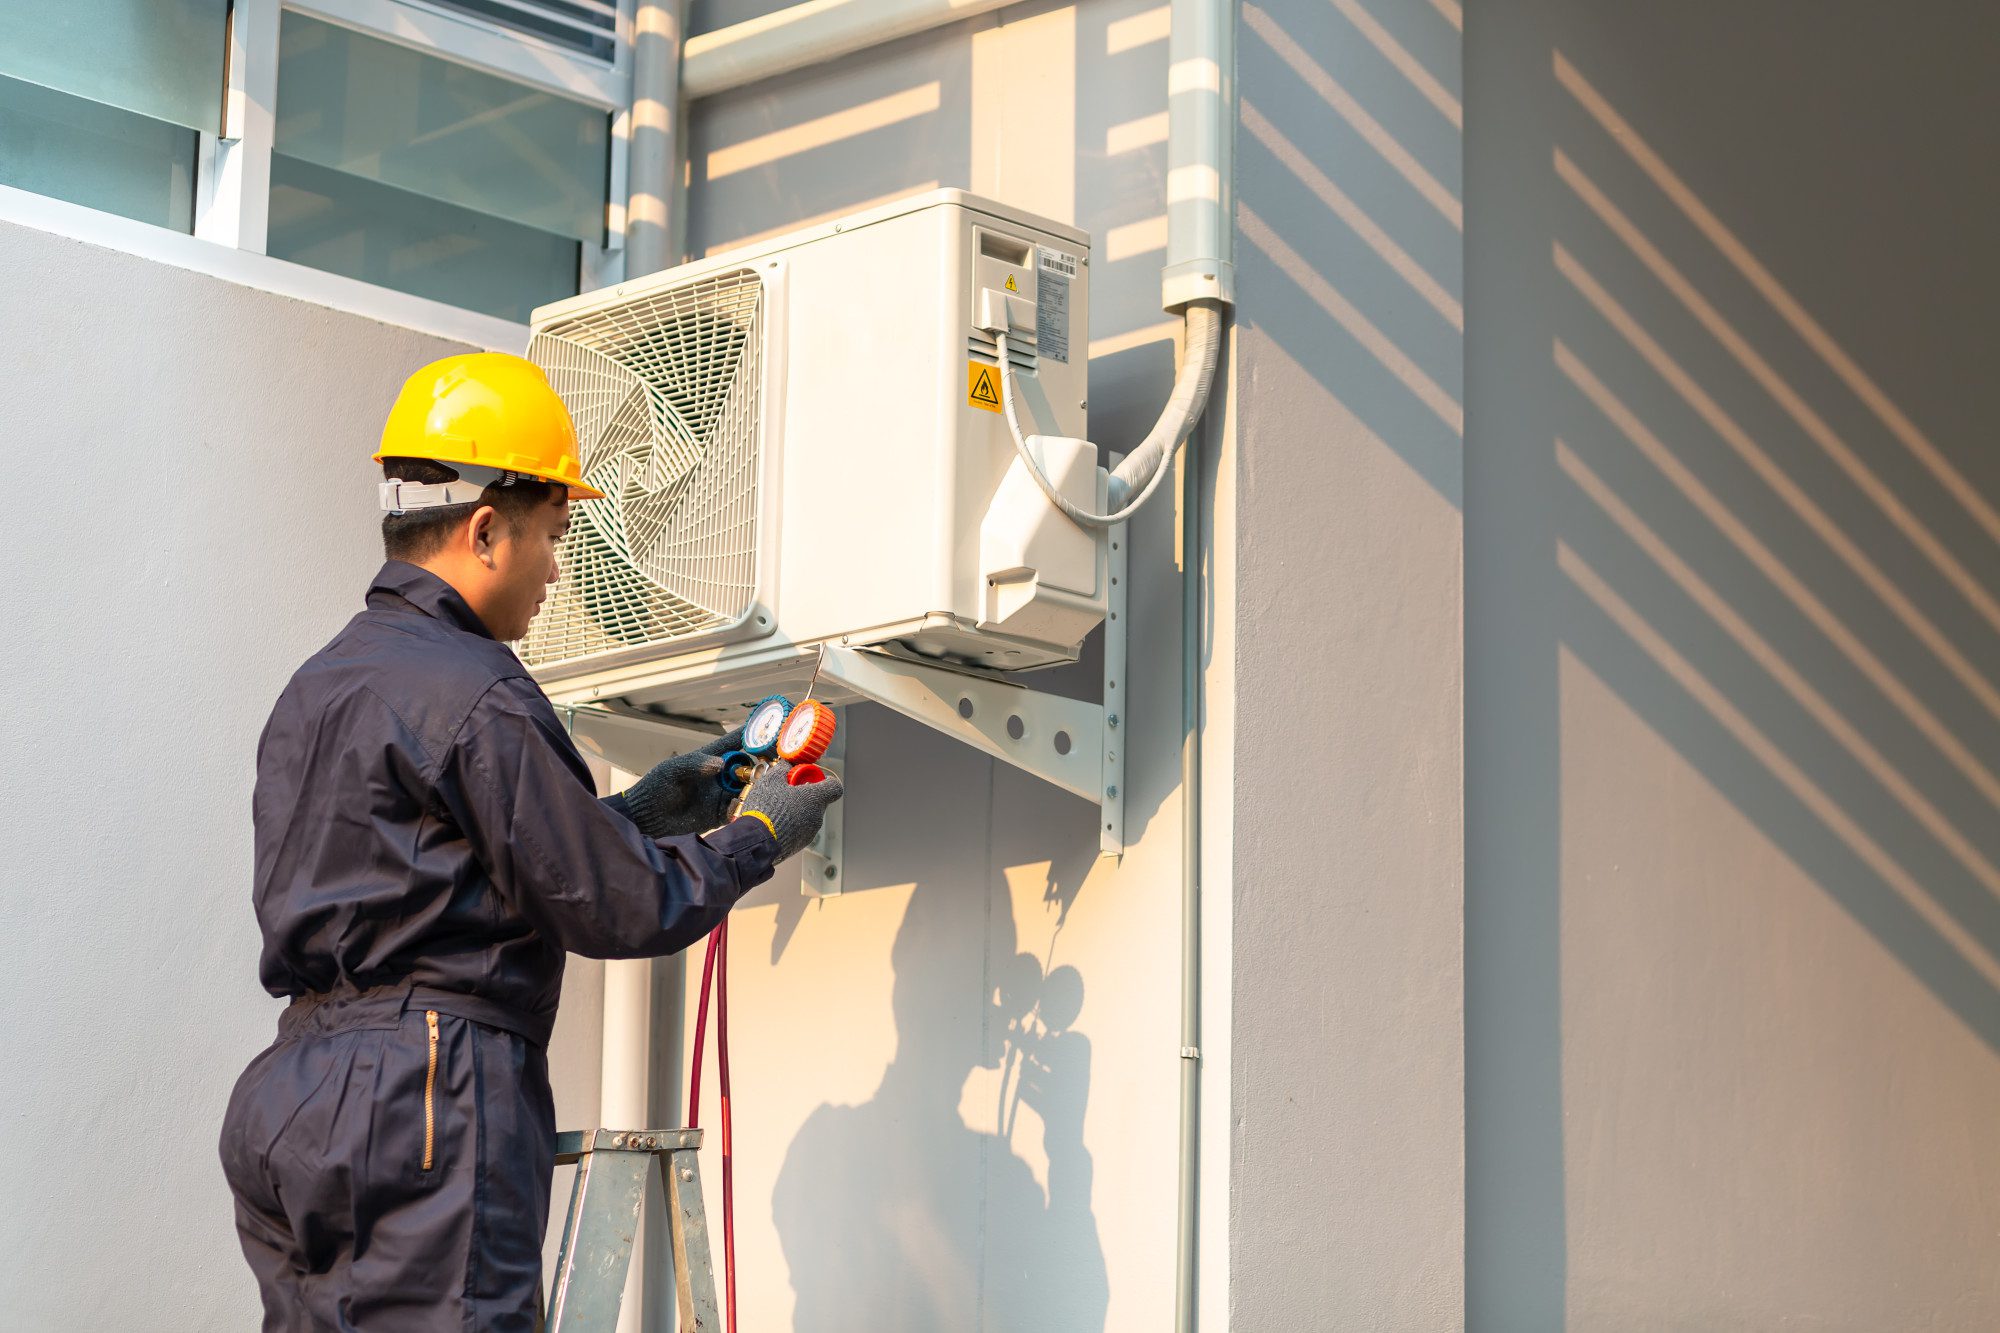 7 Tips for Hiring a Heating and Air Conditioning Service Company